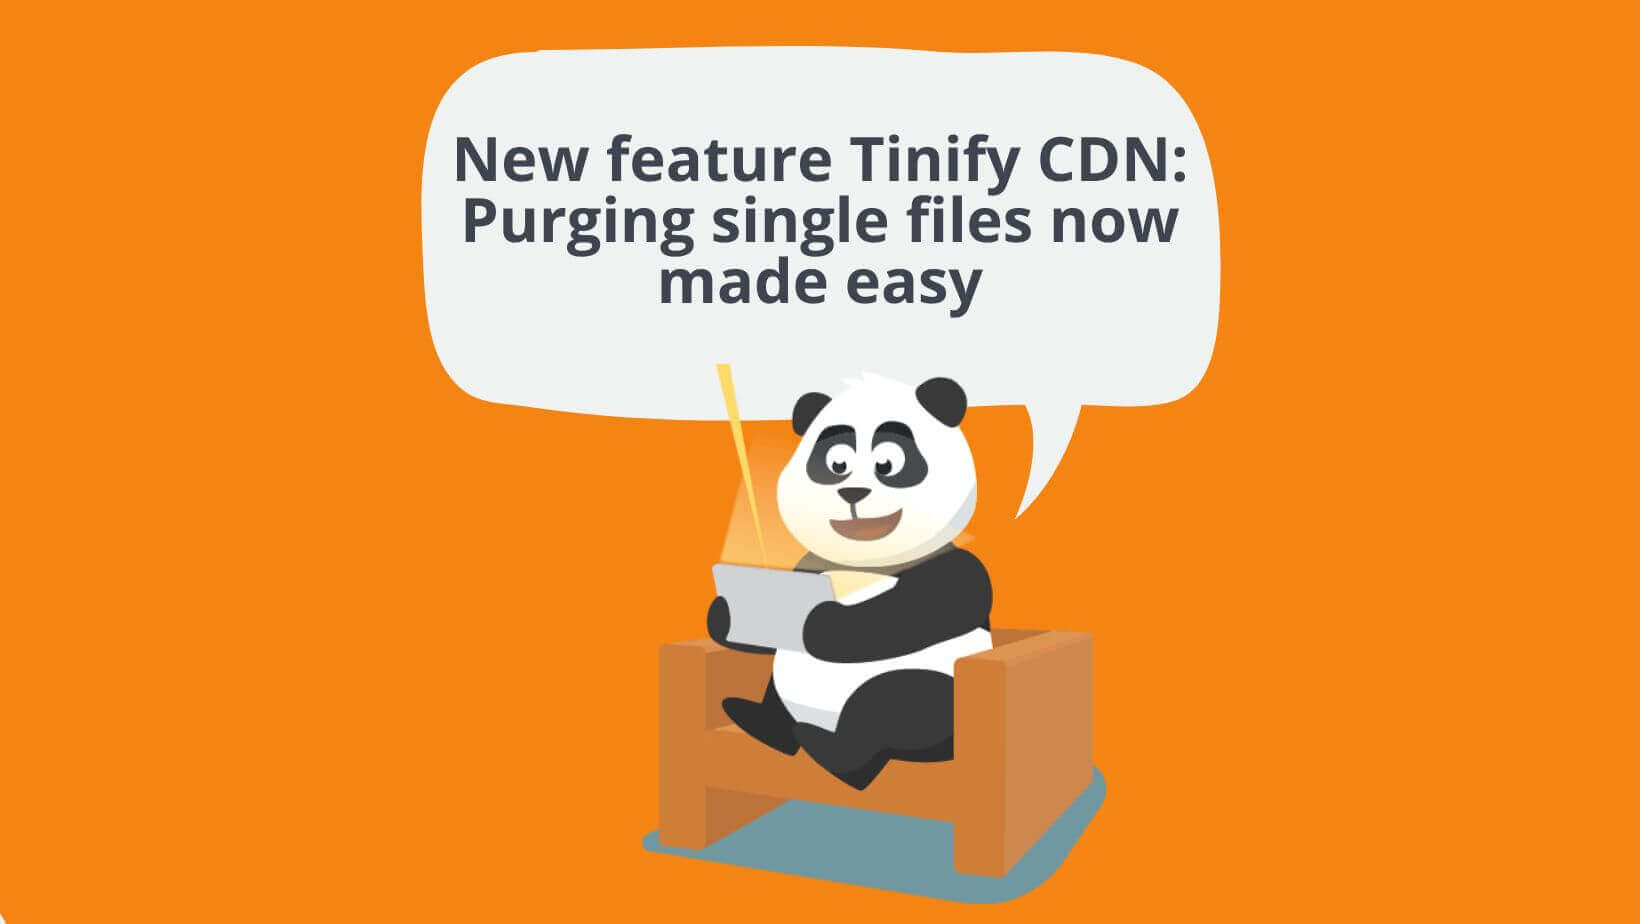 Recent feature Tinify CDN: Purging single files now made easy